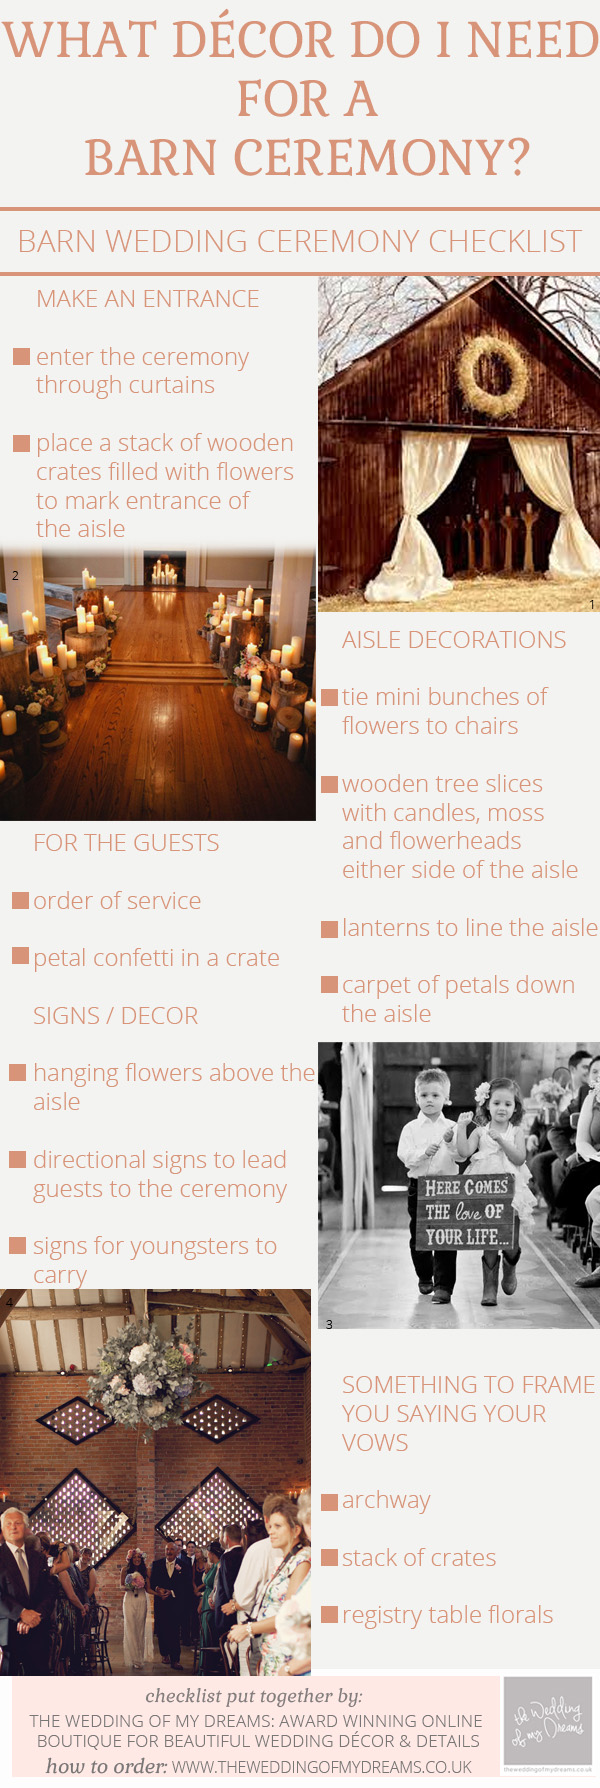 What Decorations Do I Need For A Barn Wedding Ceremony – Checklist